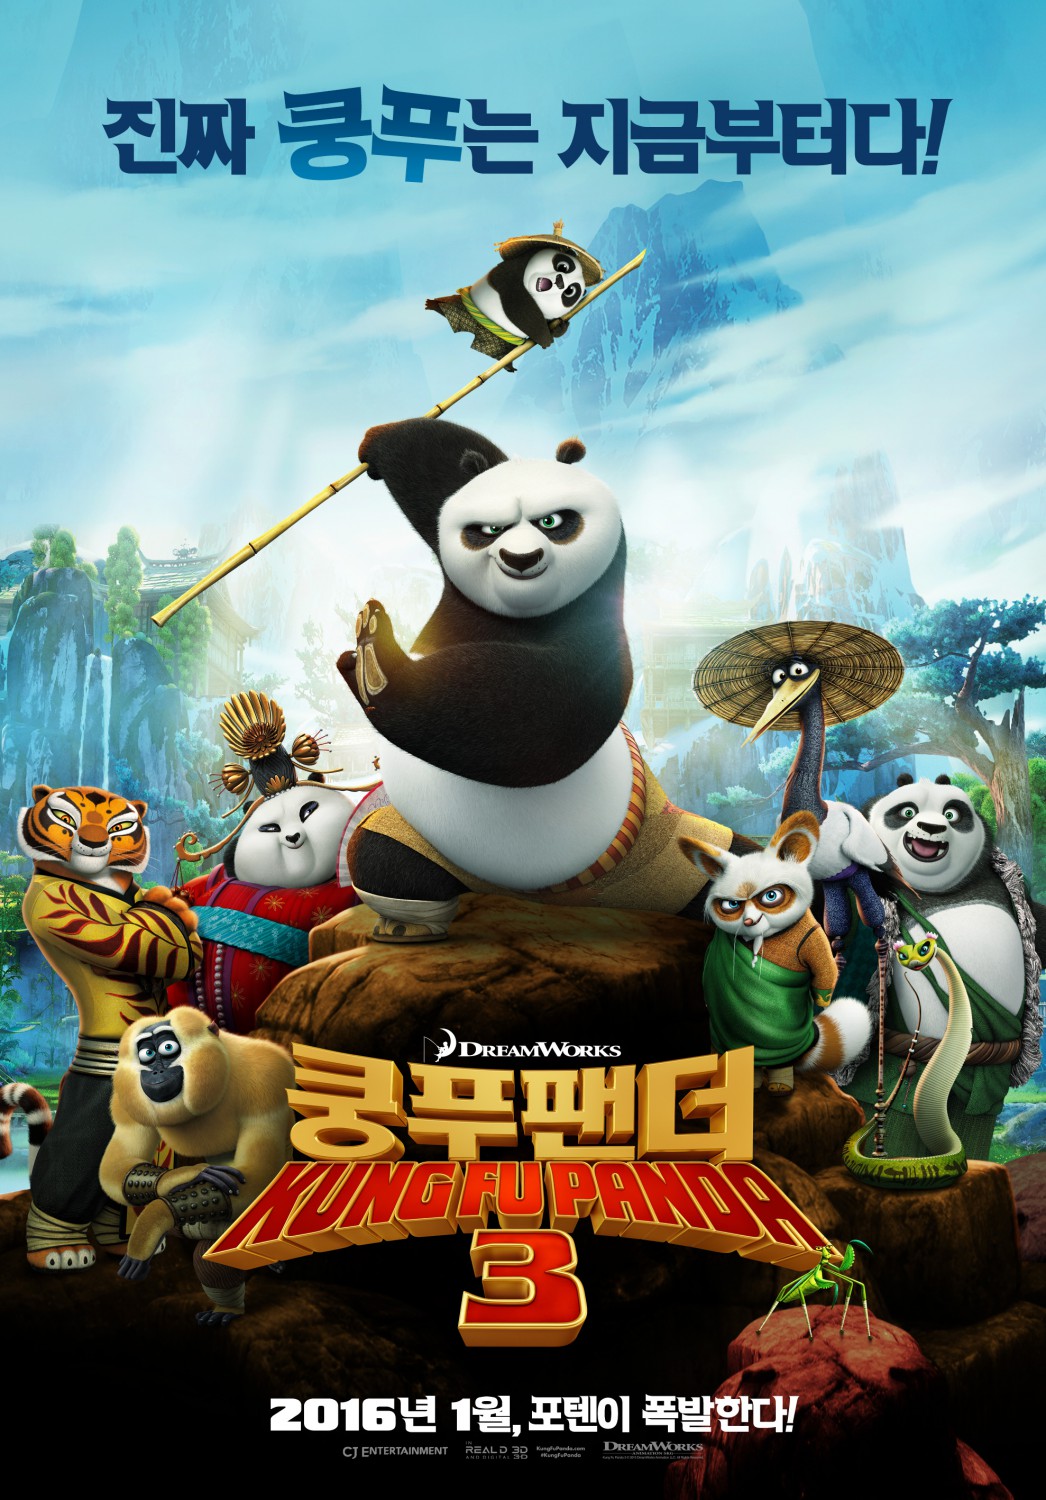 Extra Large Movie Poster Image for Kung Fu Panda 3 (#4 of 22)